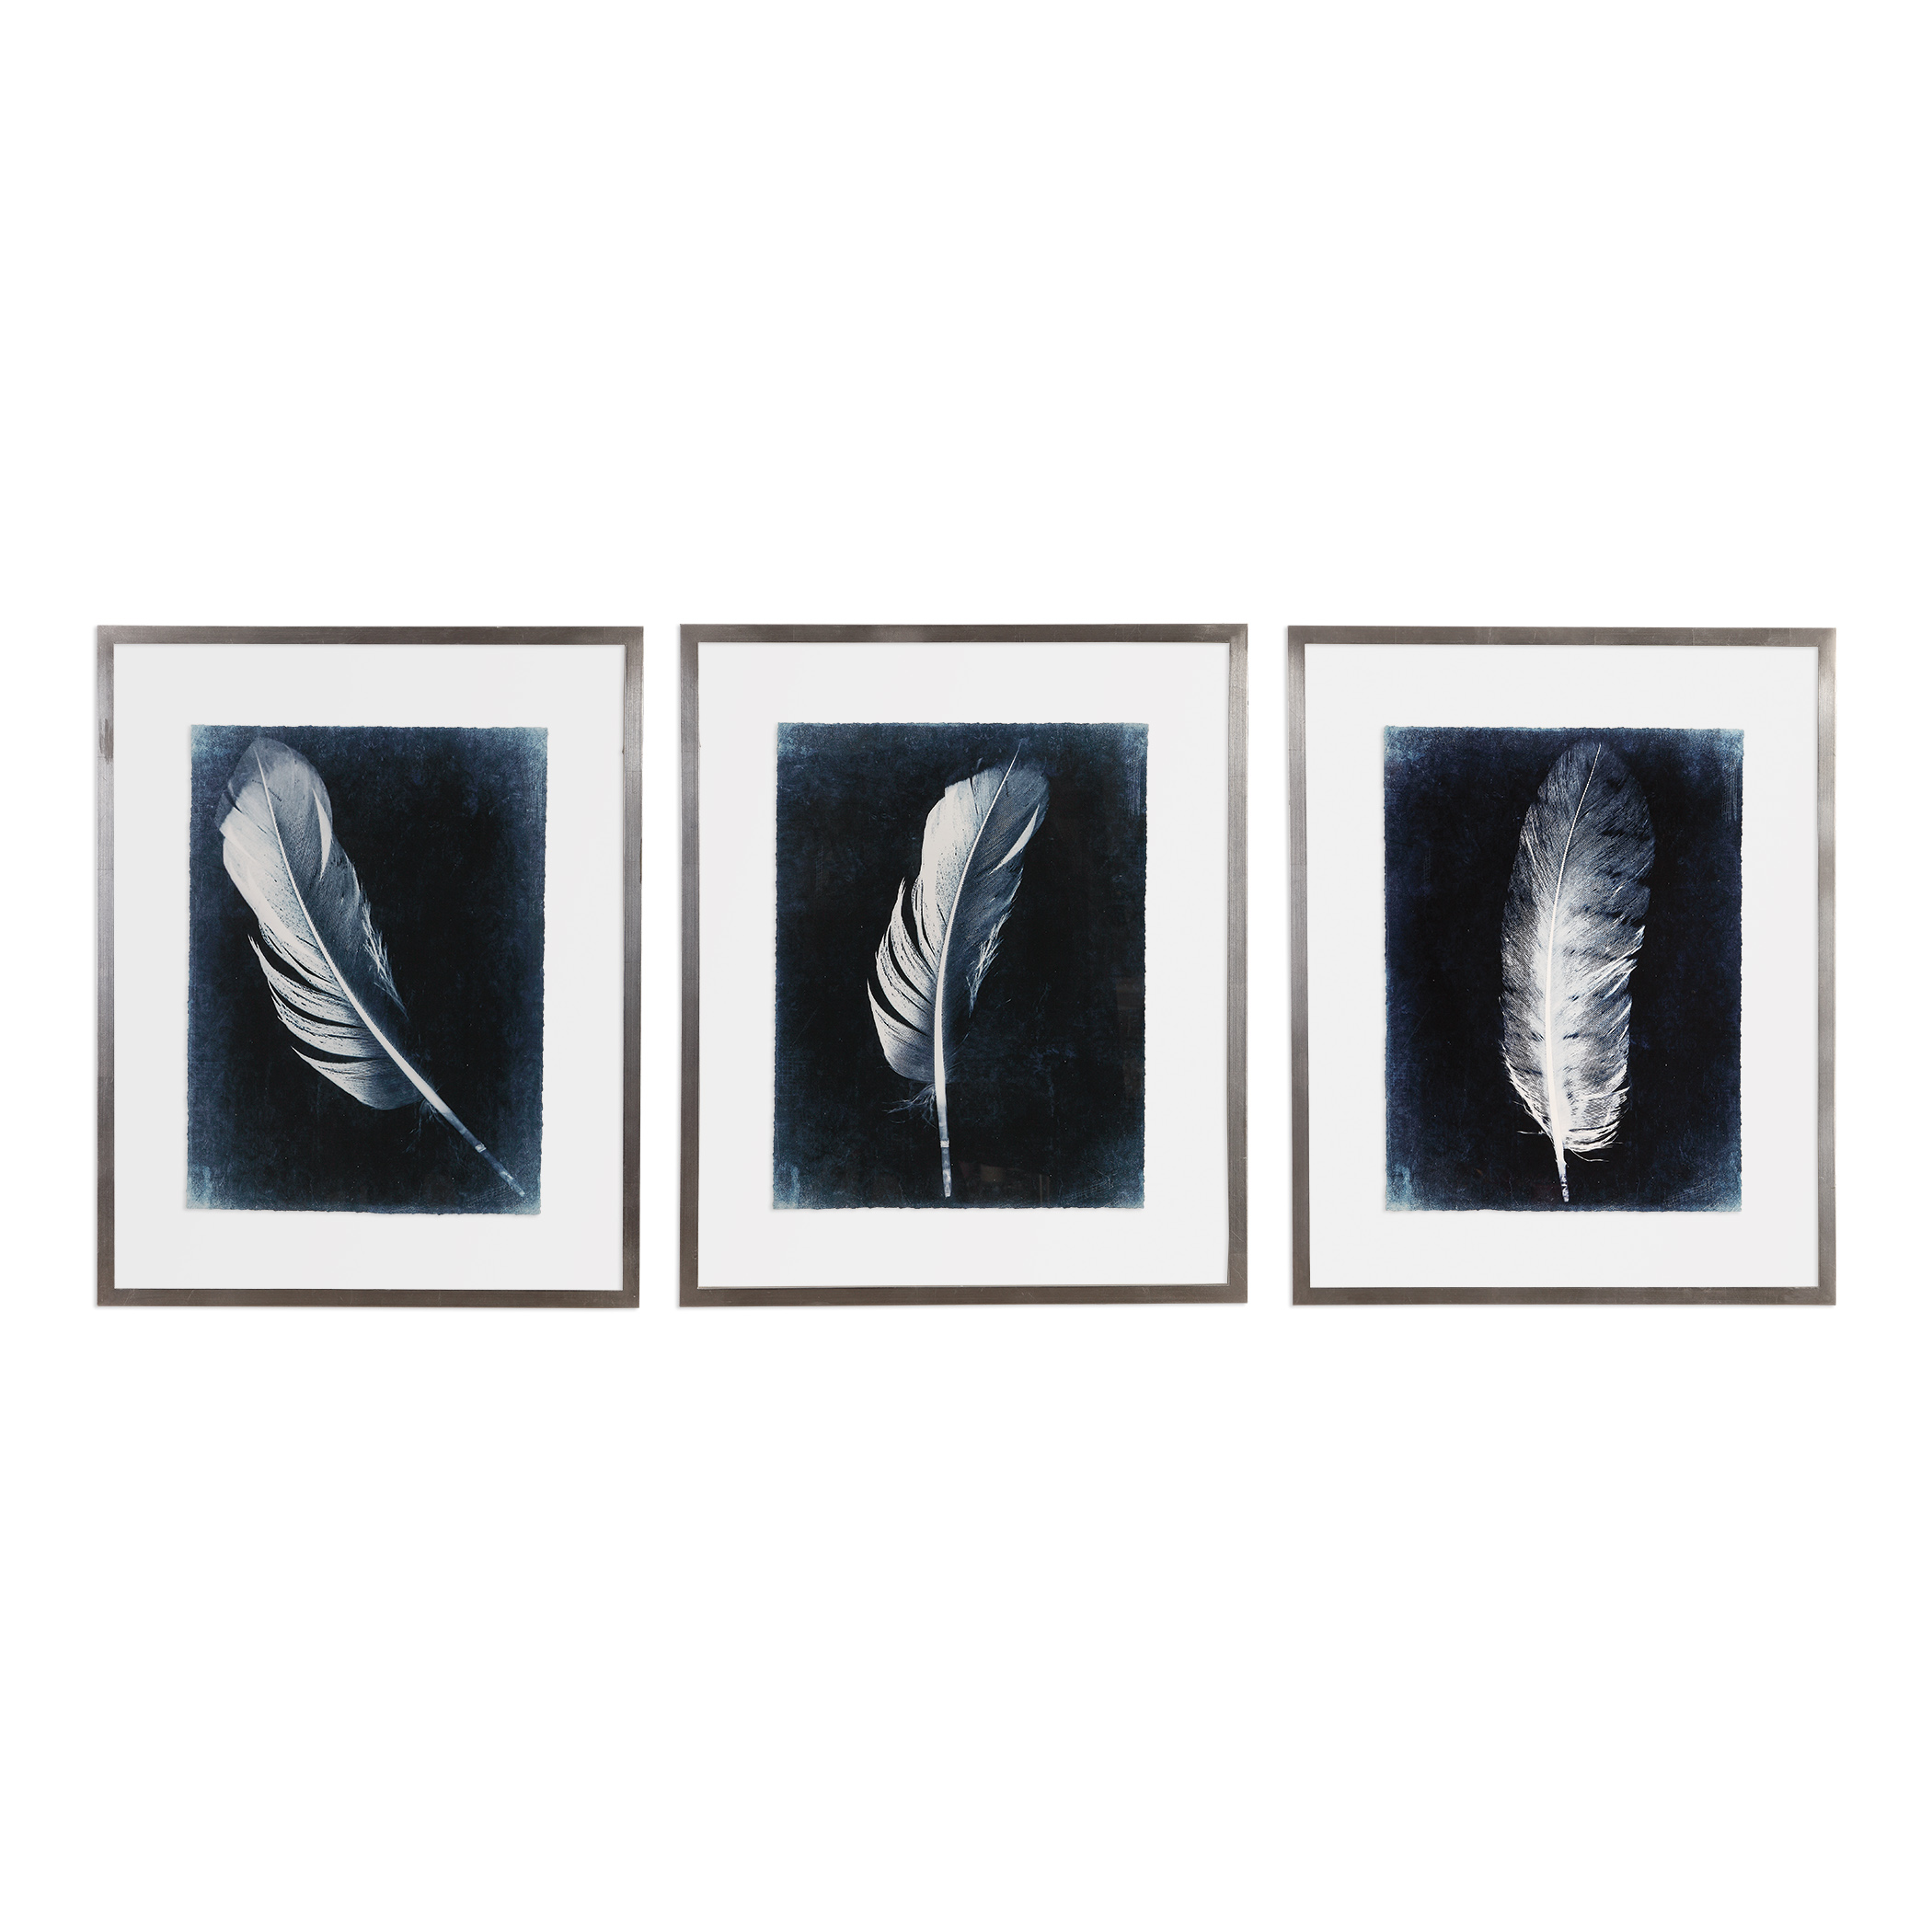 Online Designer Home/Small Office Inverted Feathers Prints, S/3